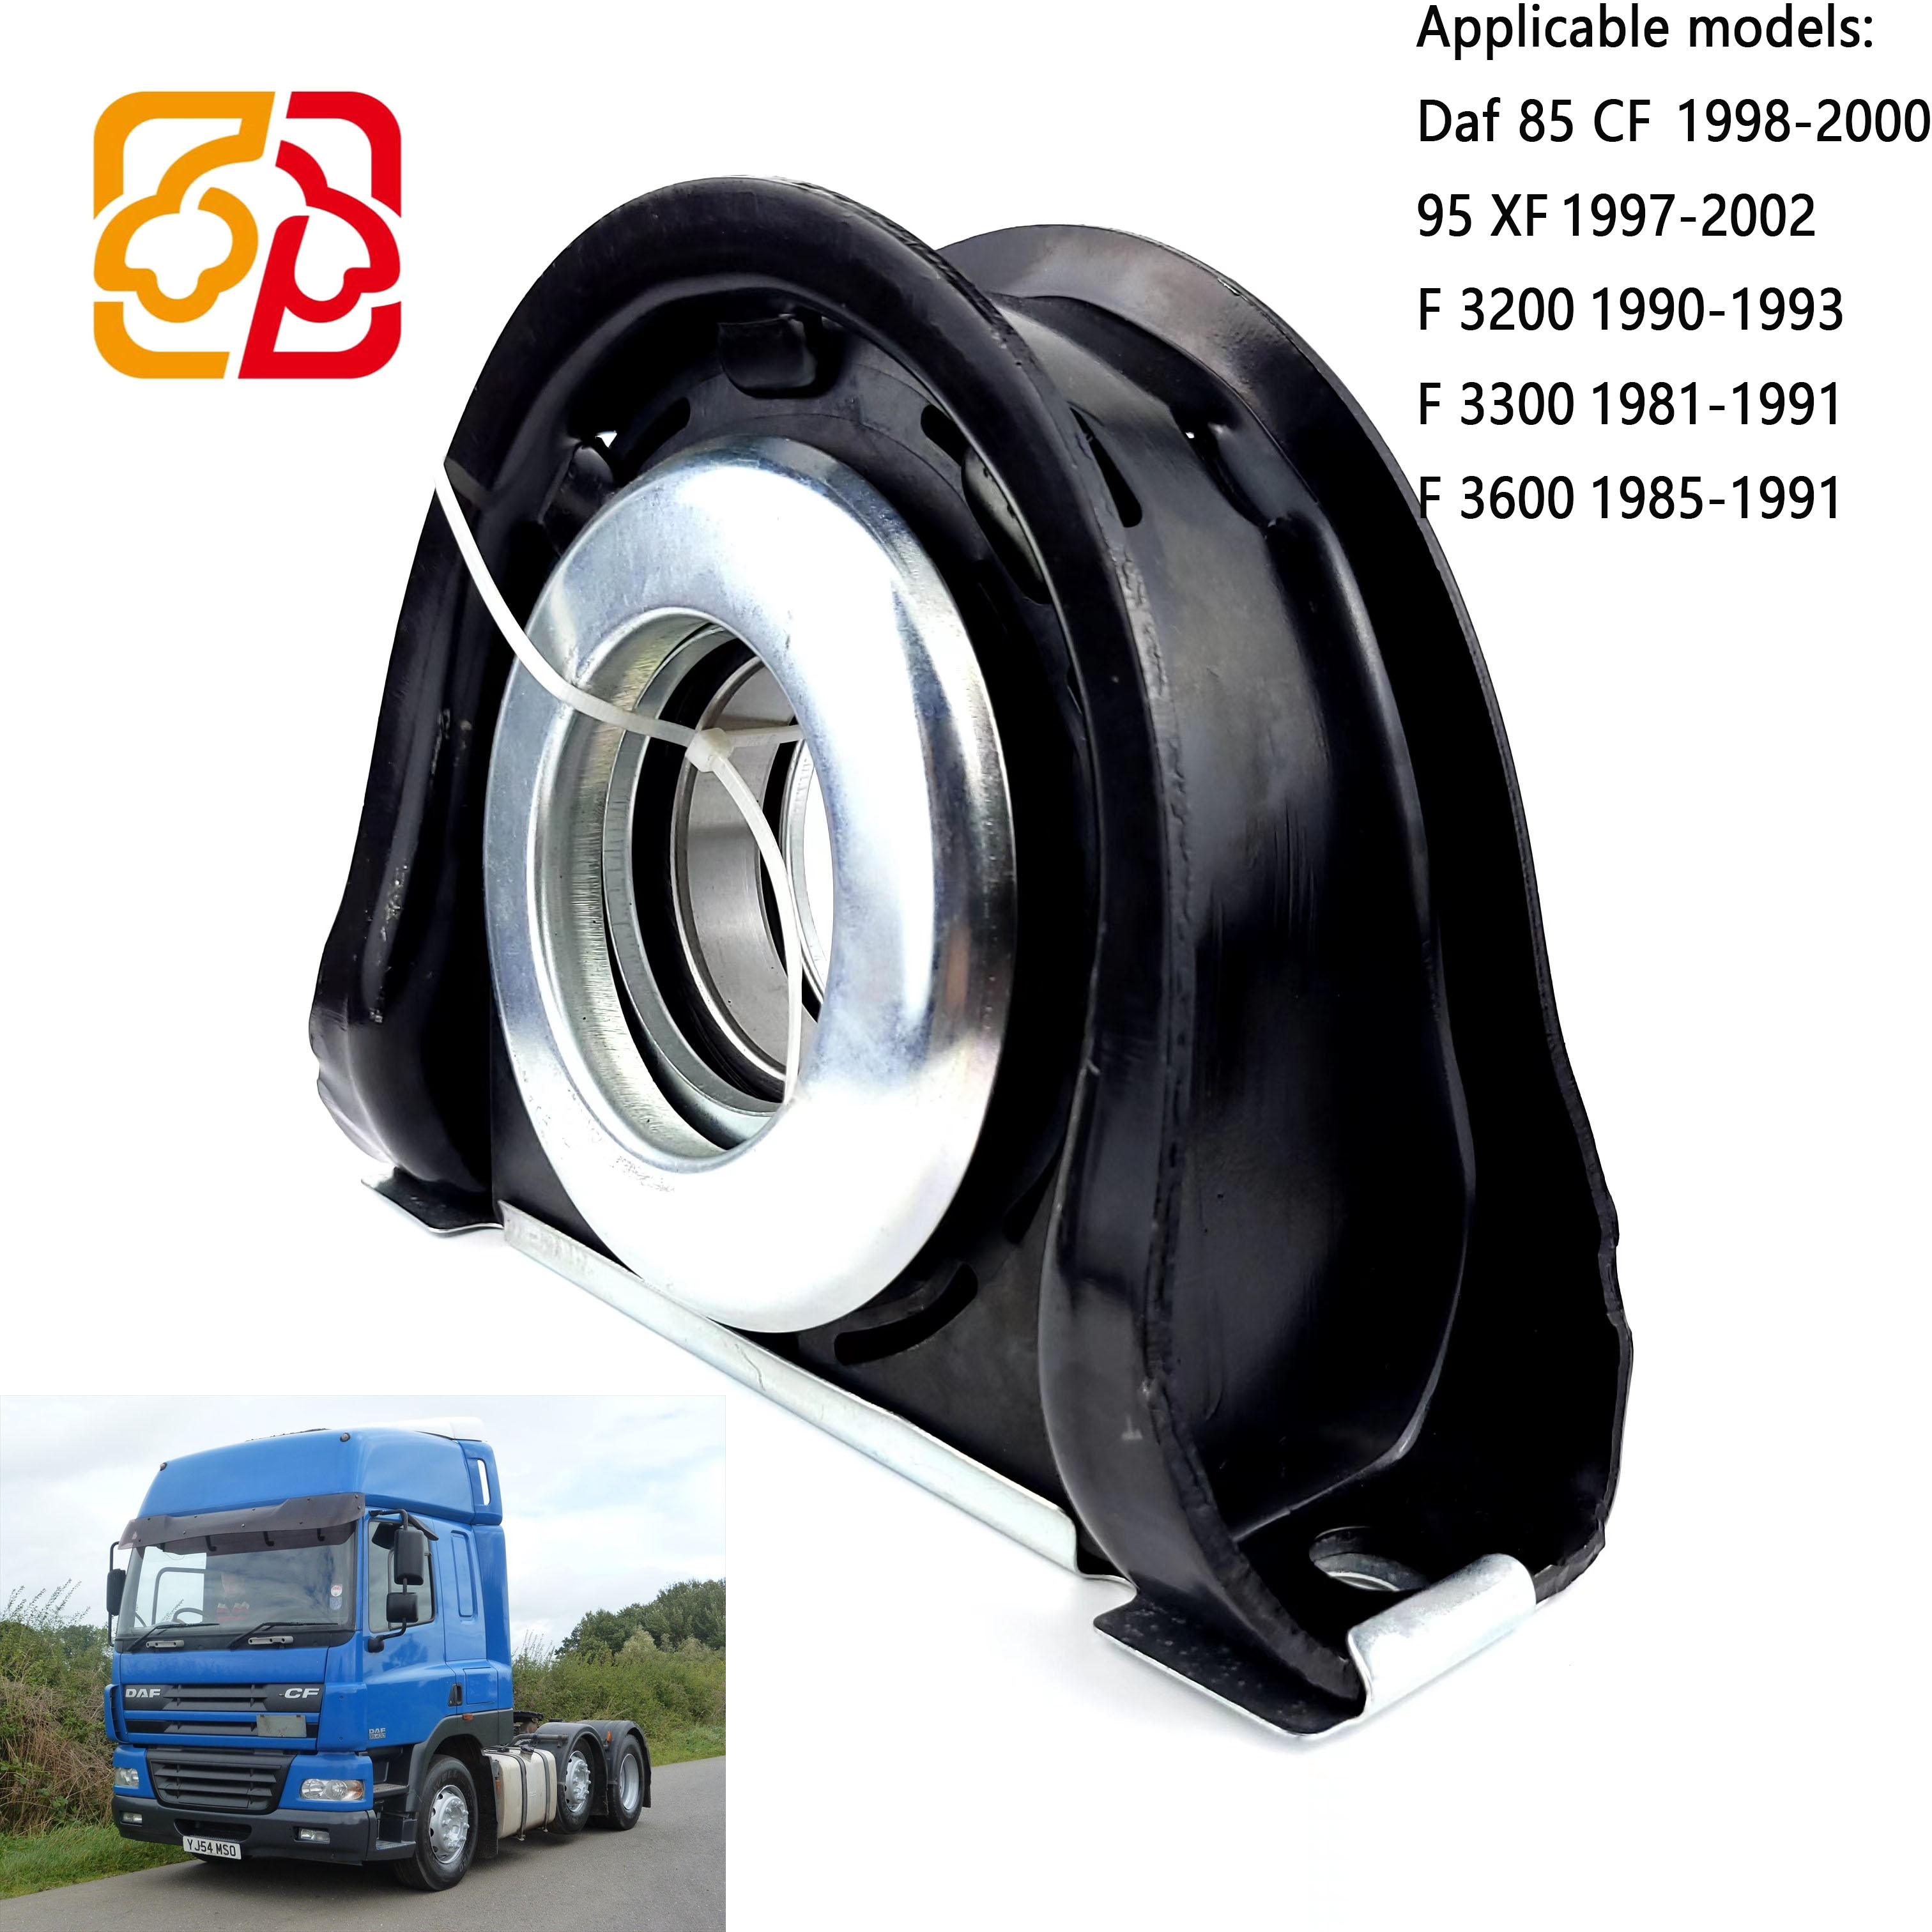 European truck parts Volvo, DAF, Iveco, OEM1235569, 93163689, 20471428 Drive shaft center support shaft bearings